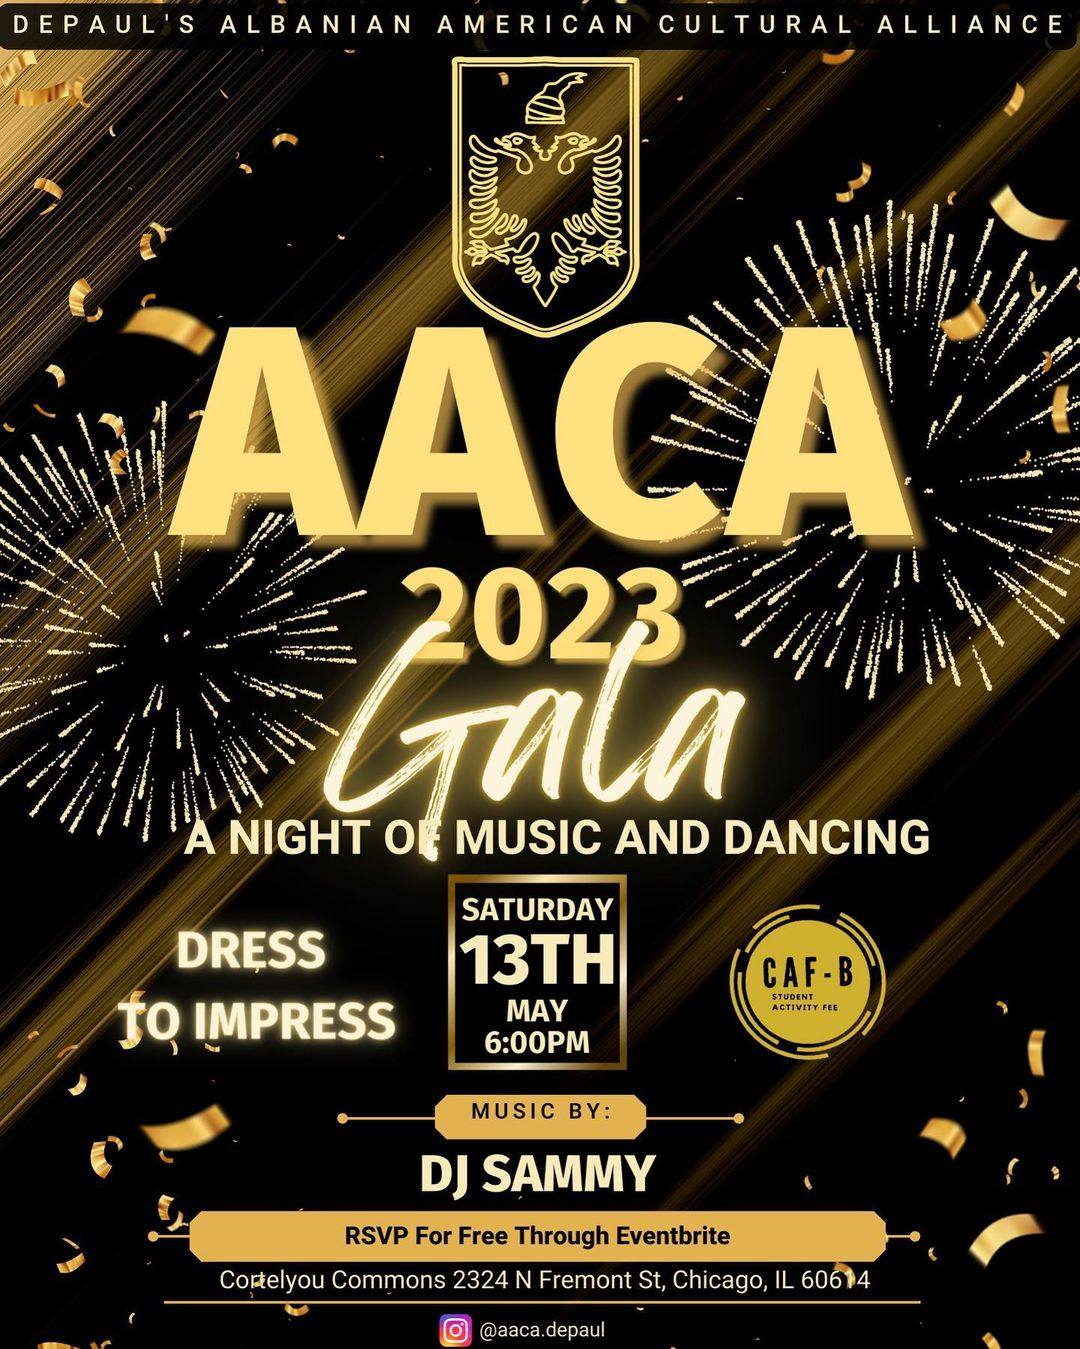 AACA End of the Year Gala 2023